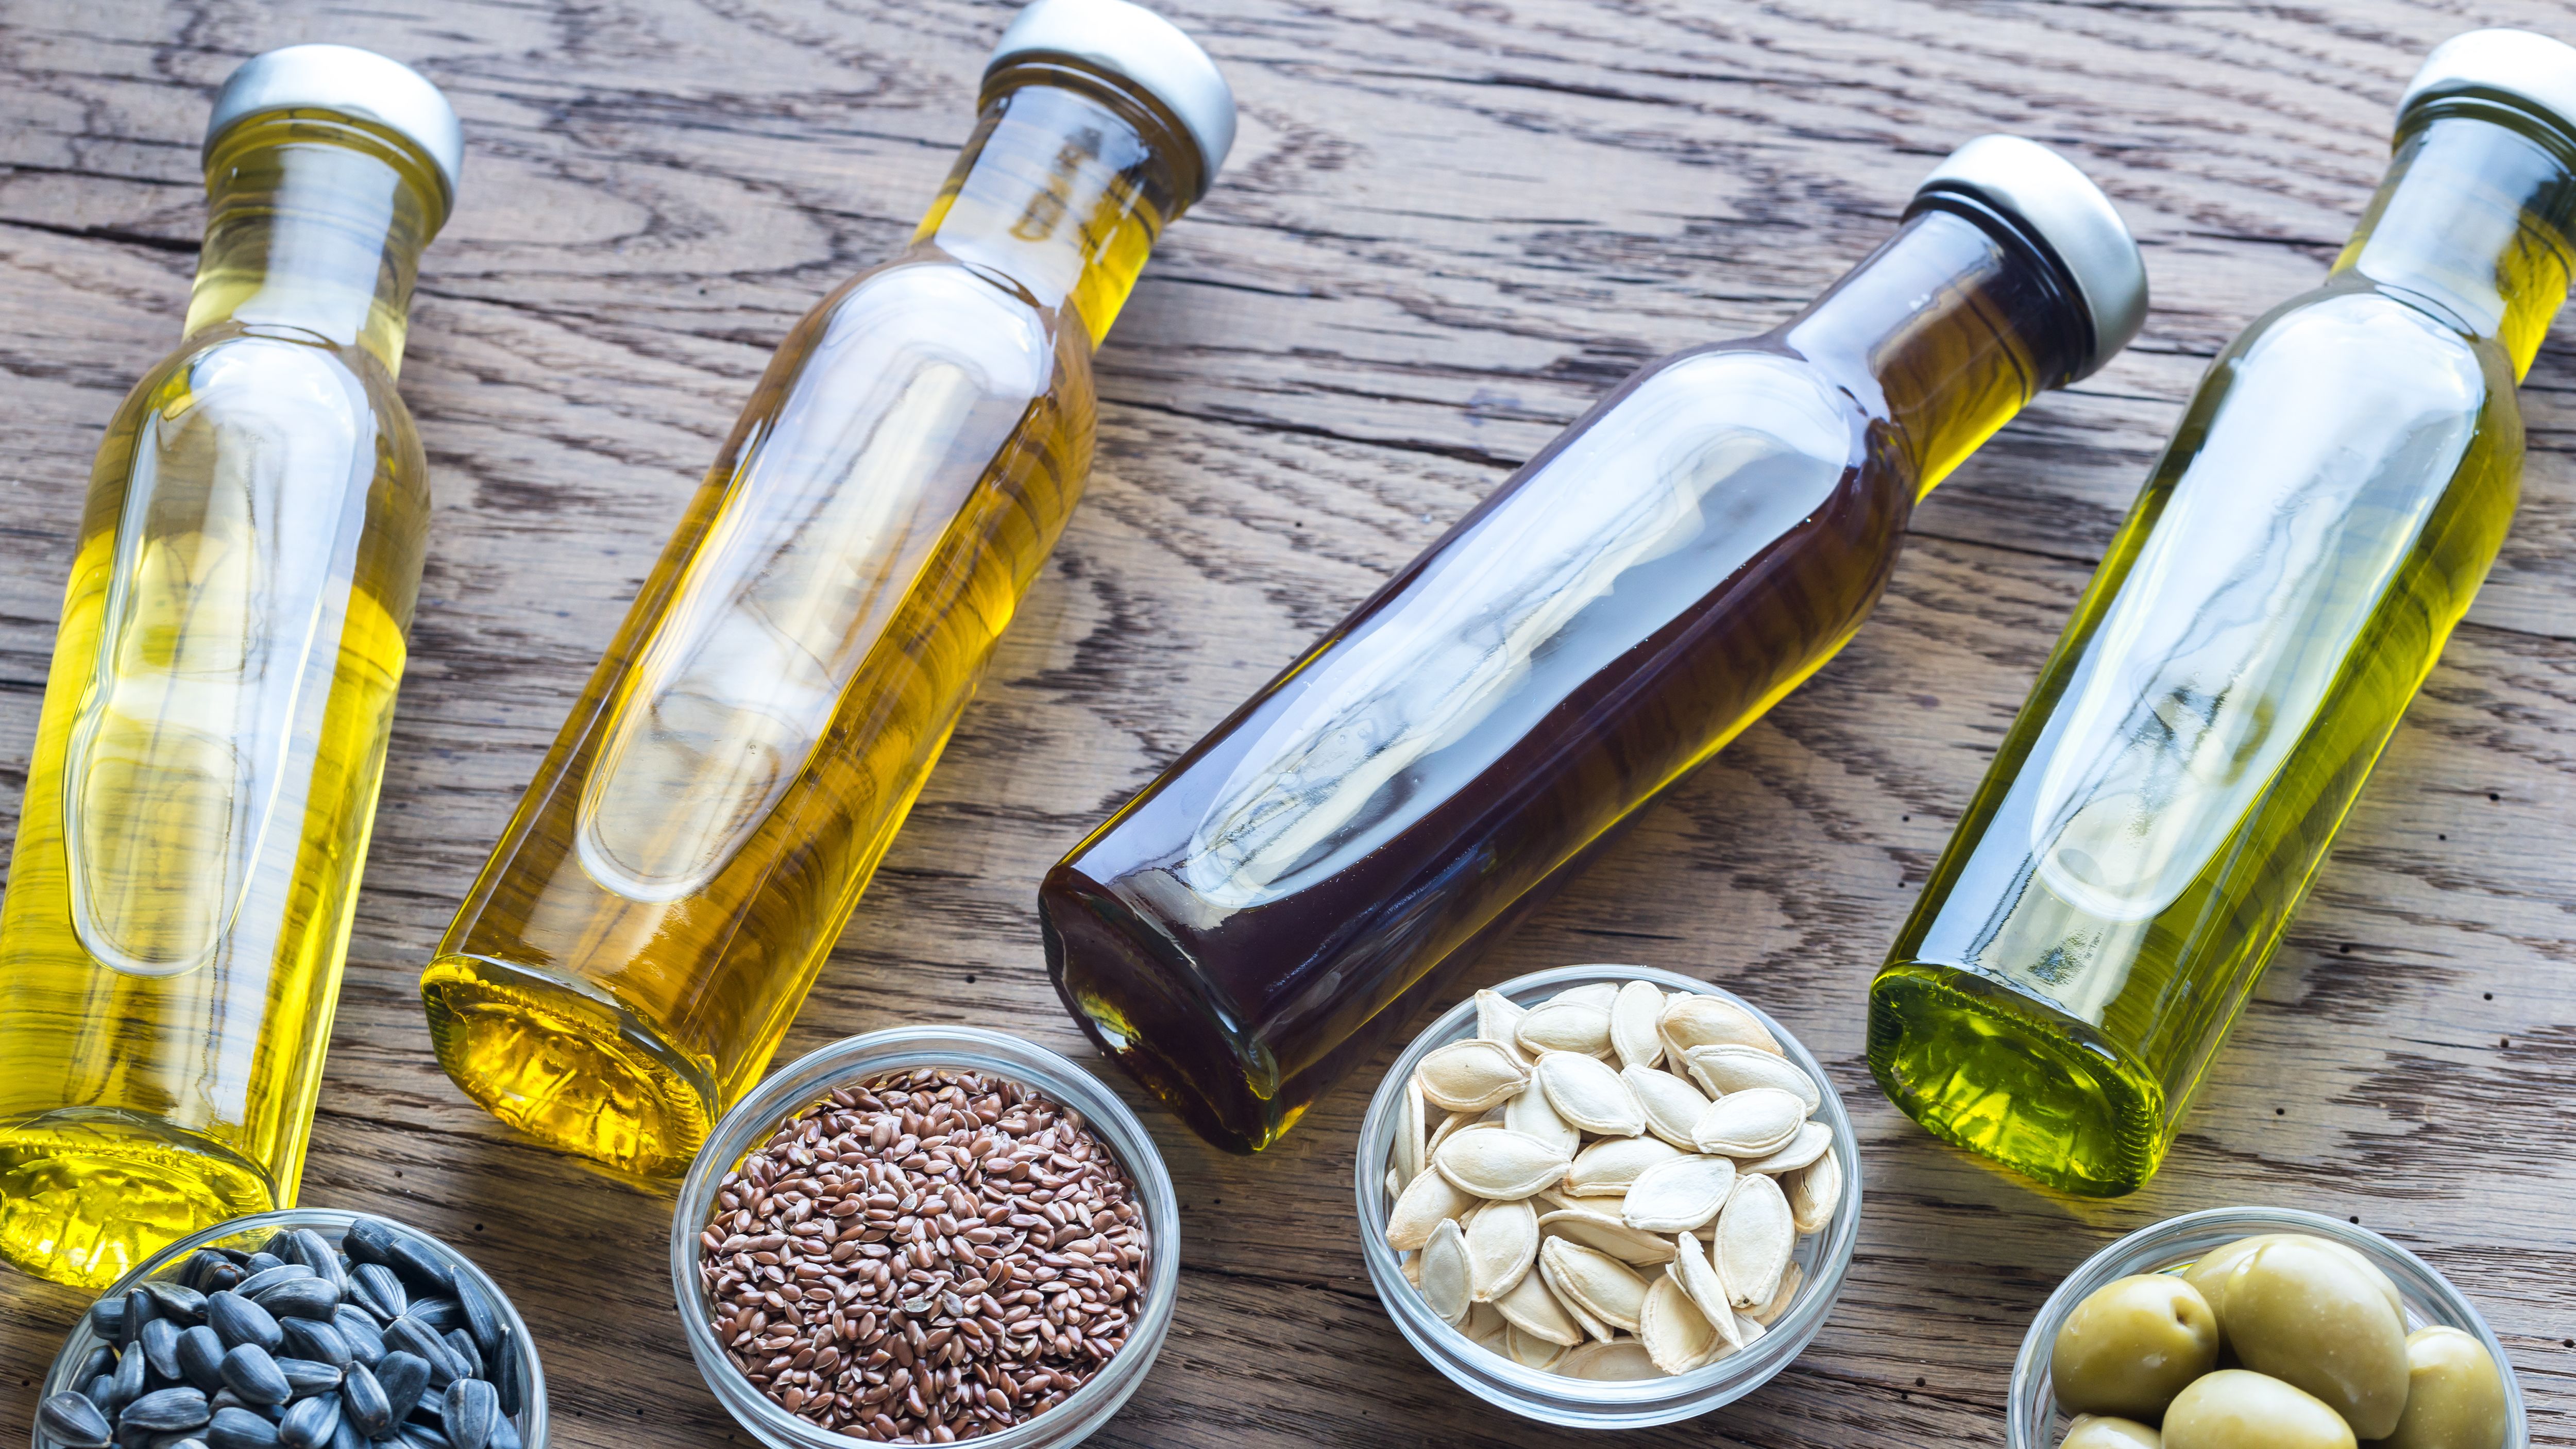 Are vegetable oils healthy?